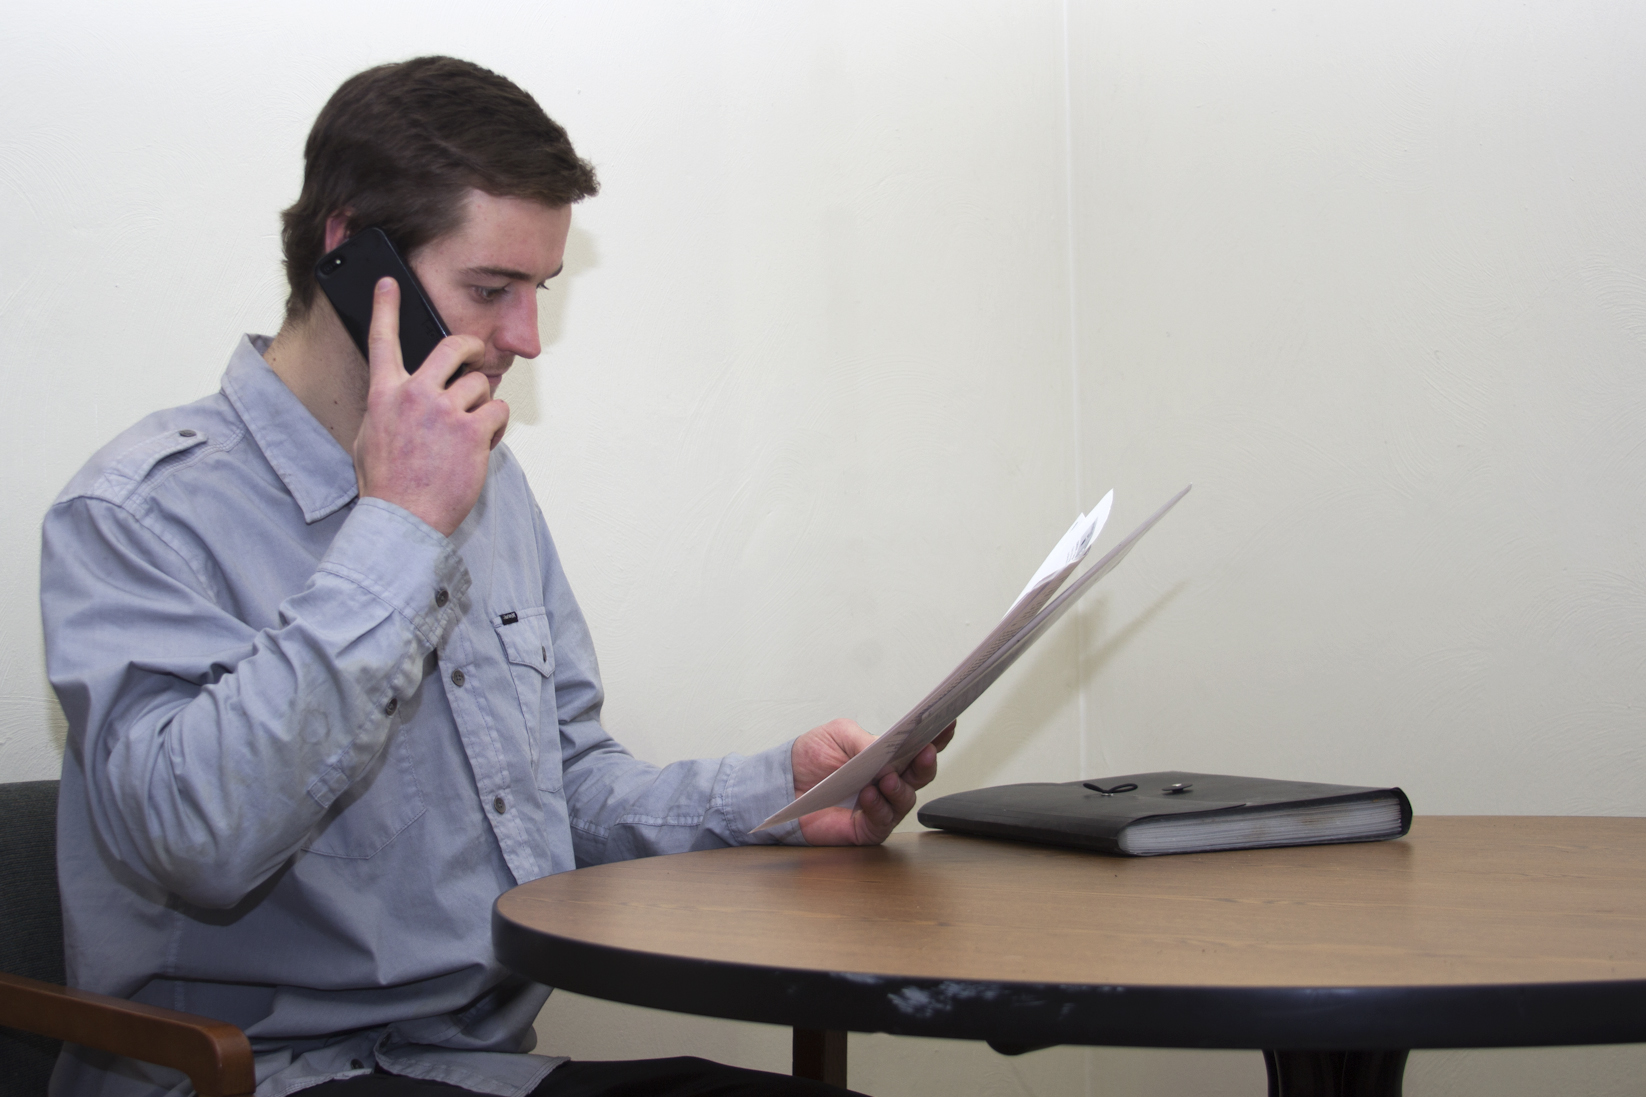 How to Succeed at Over-the-Phone Interviews